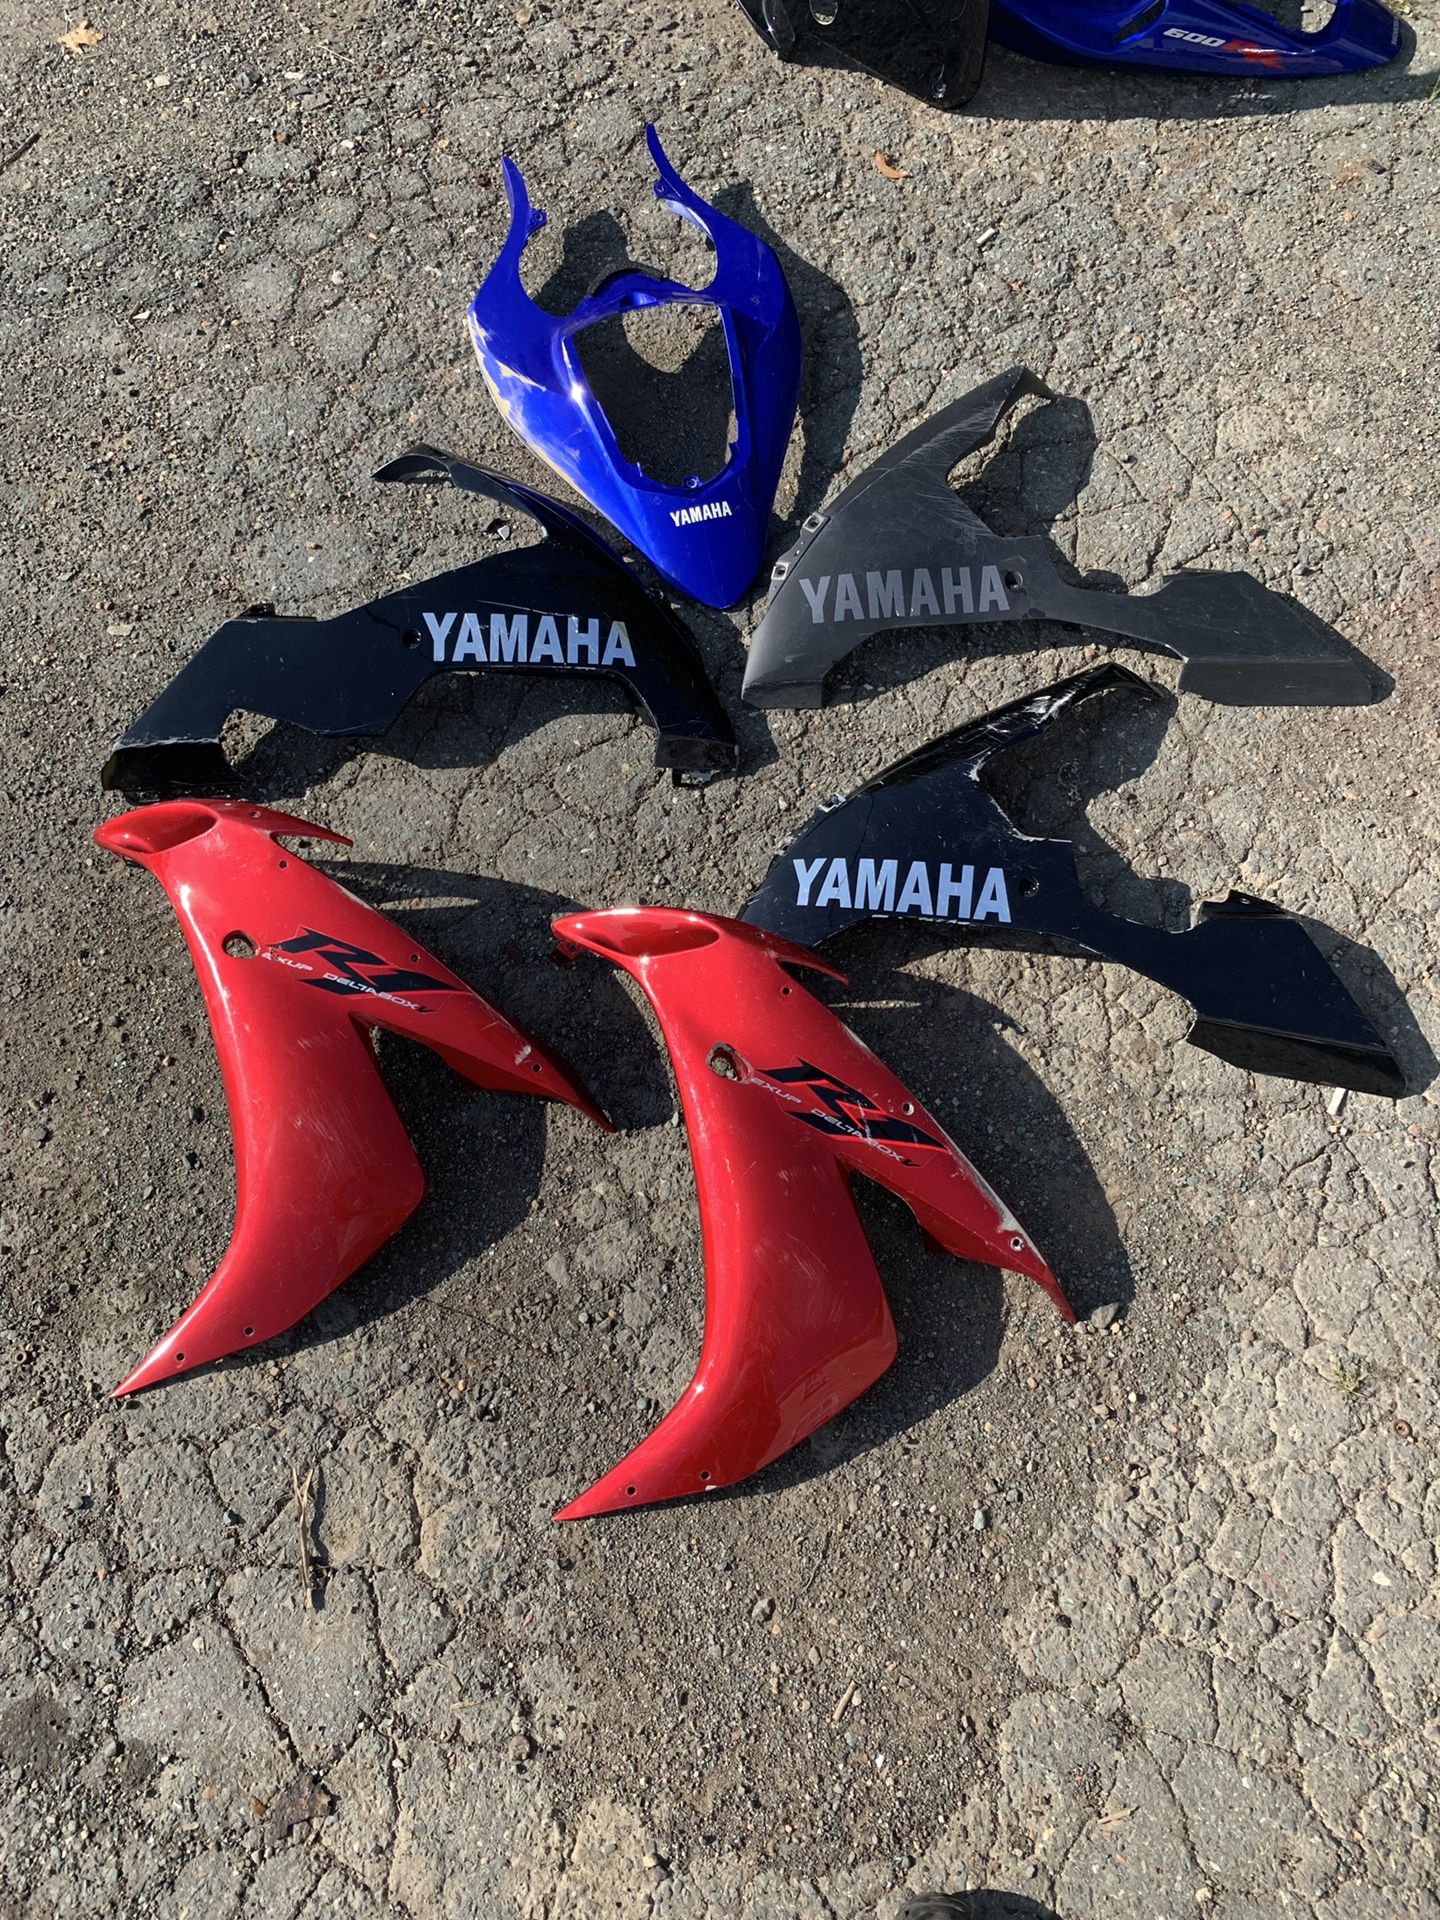 04-06 Yamaha R1 body lets Fairings nose mids lowers tail etc